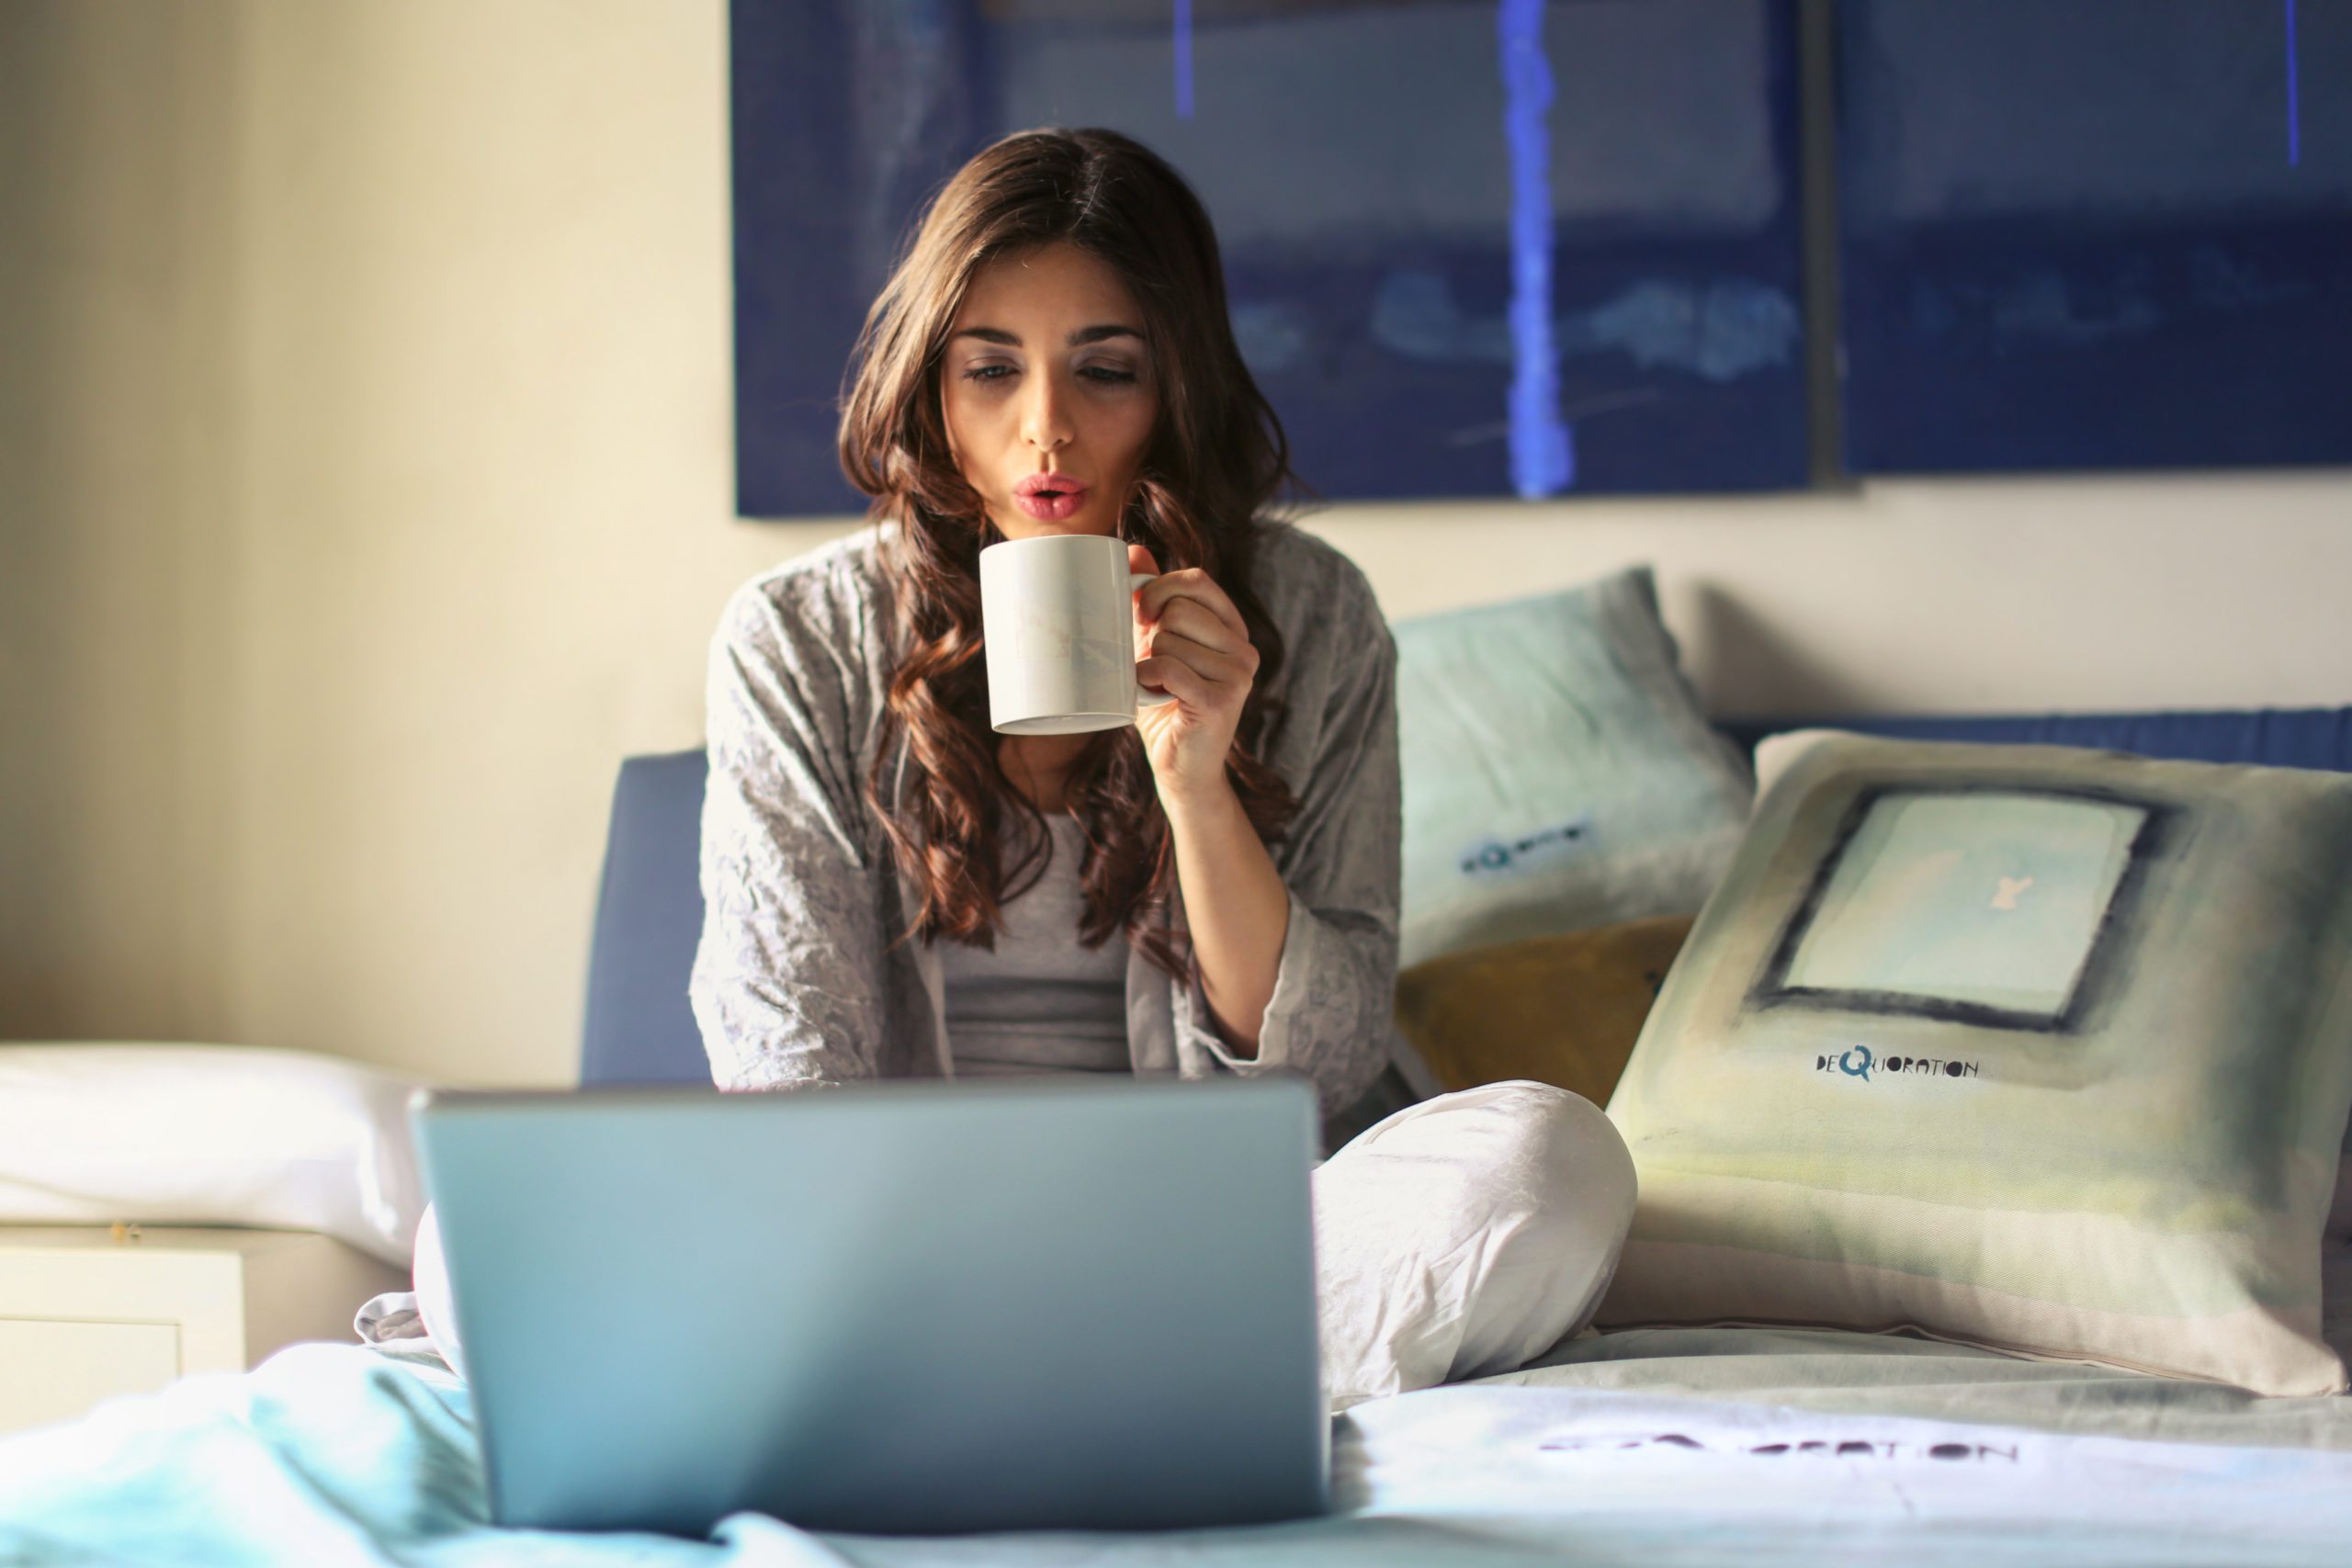 A young woman cools off her cup of coffee while she sits on her bed and logs into her Hoffman Renters Portal, seeking storm advice.